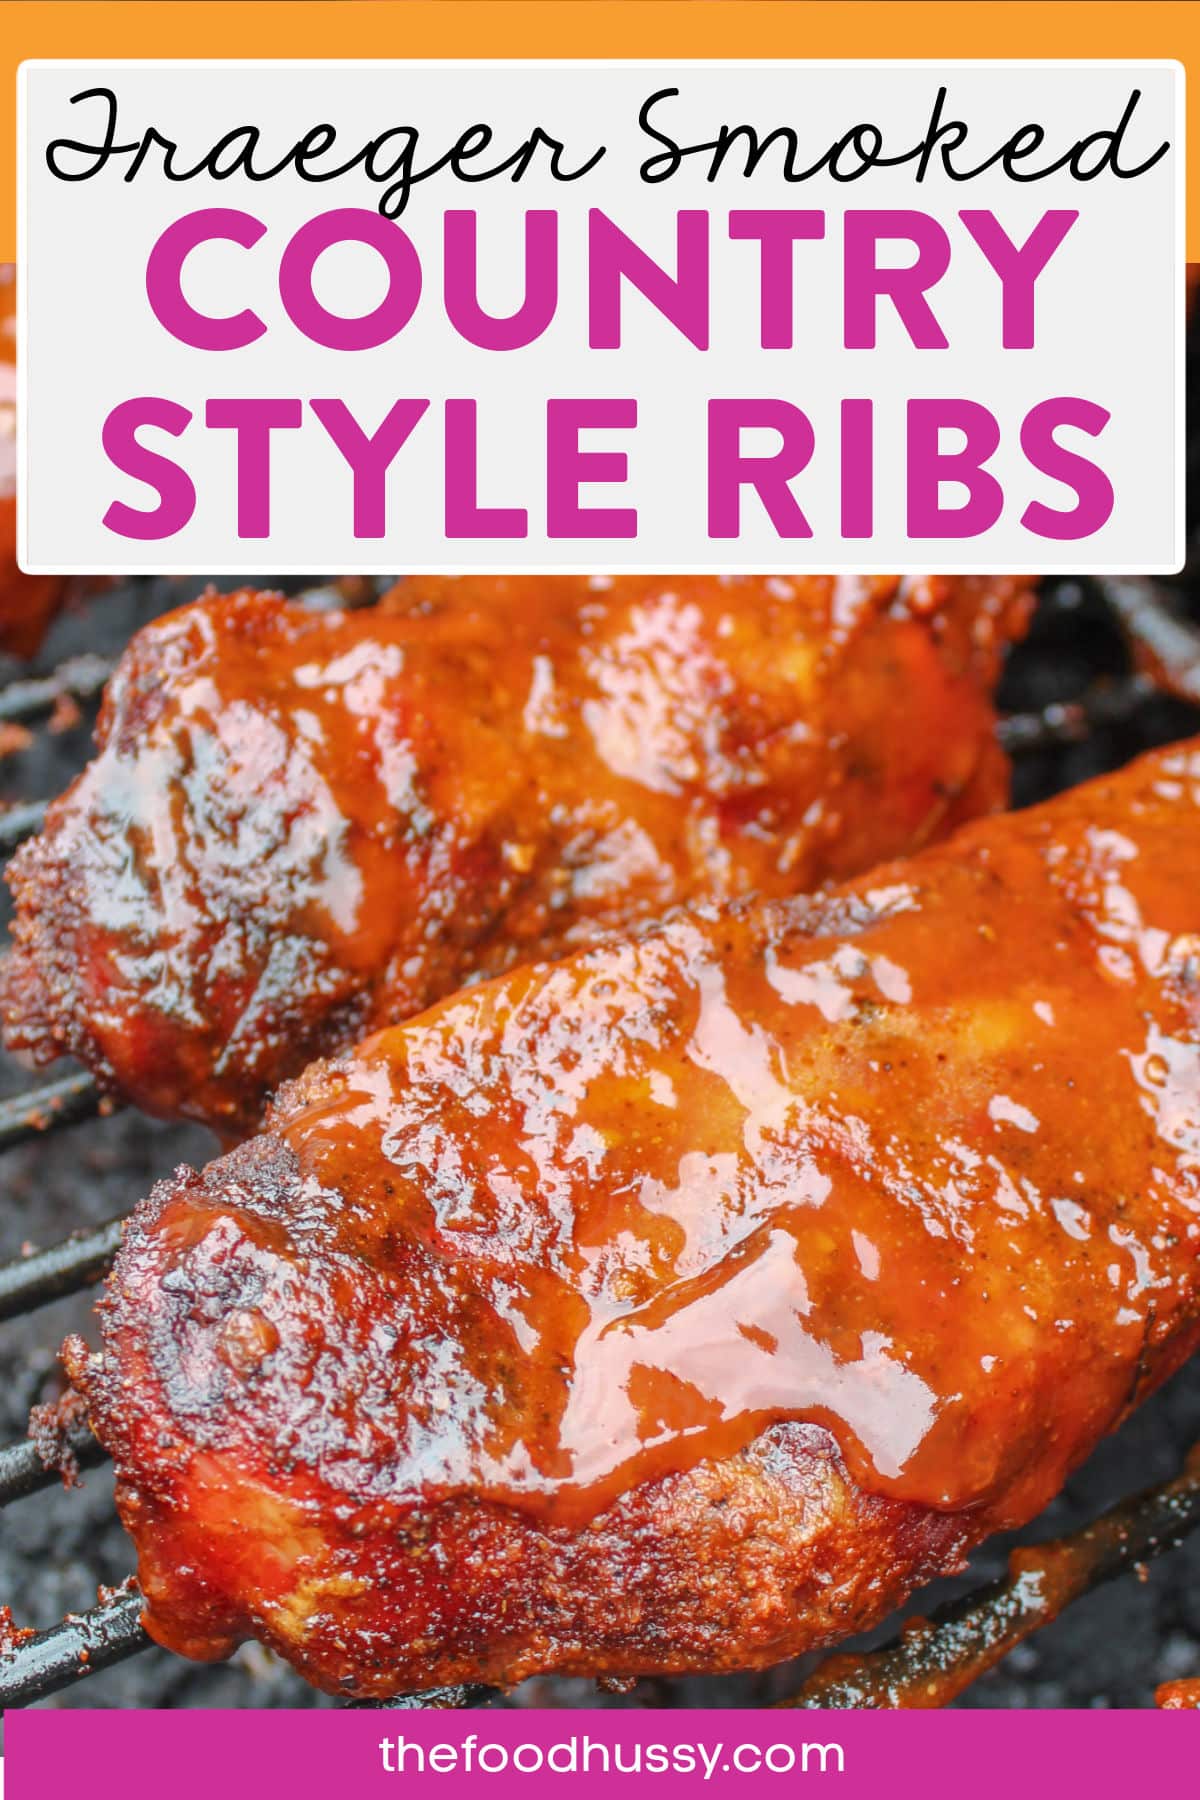 Smoked country style ribs on the Traeger are a delicious new way to enjoy an affordable and delicious cut of pork. Low and slow brings out the best in this family favorite, the Traeger Smoked Country Style Pork Ribs. Learn how to cook these ribs just right. via @foodhussy